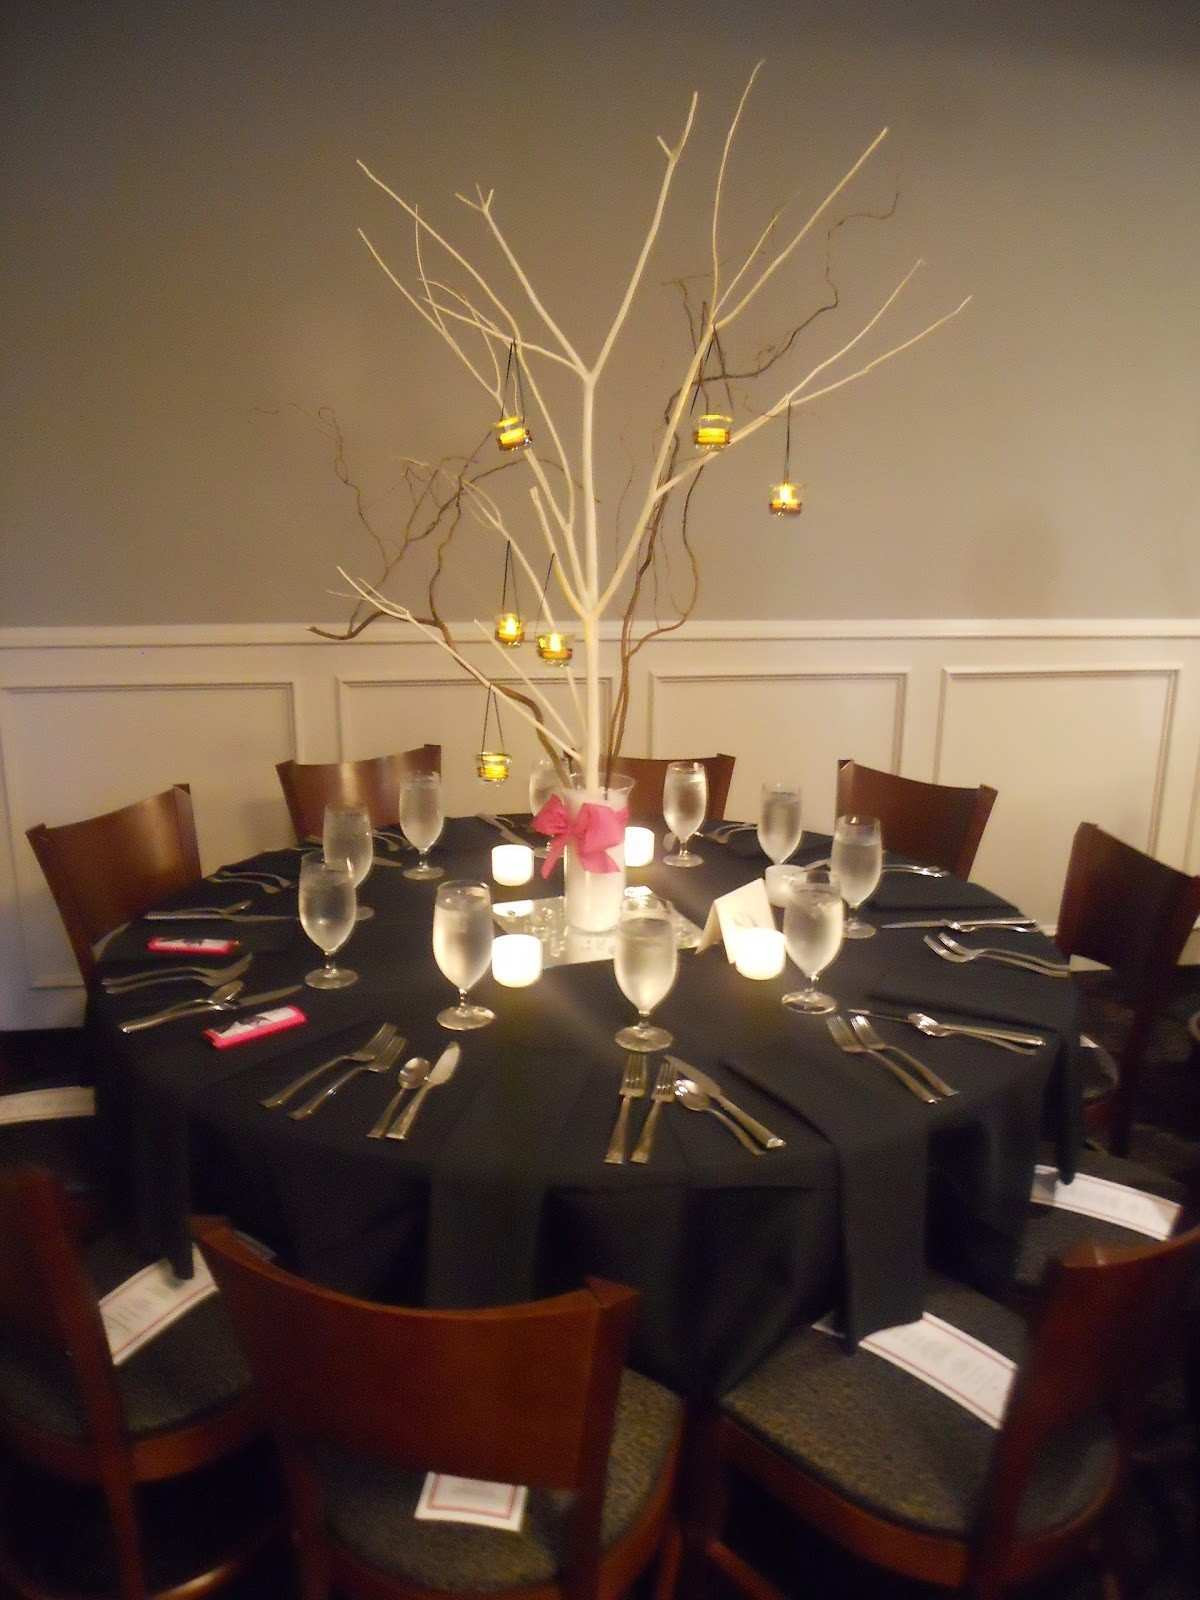 25 Stylish Floral Centerpiece Vases 2024 free download floral centerpiece vases of birch branch decor new dollar tree wedding decorations awesome h pertaining to birch branch decor new dollar tree wedding decorations awesome h vases dollar vase 